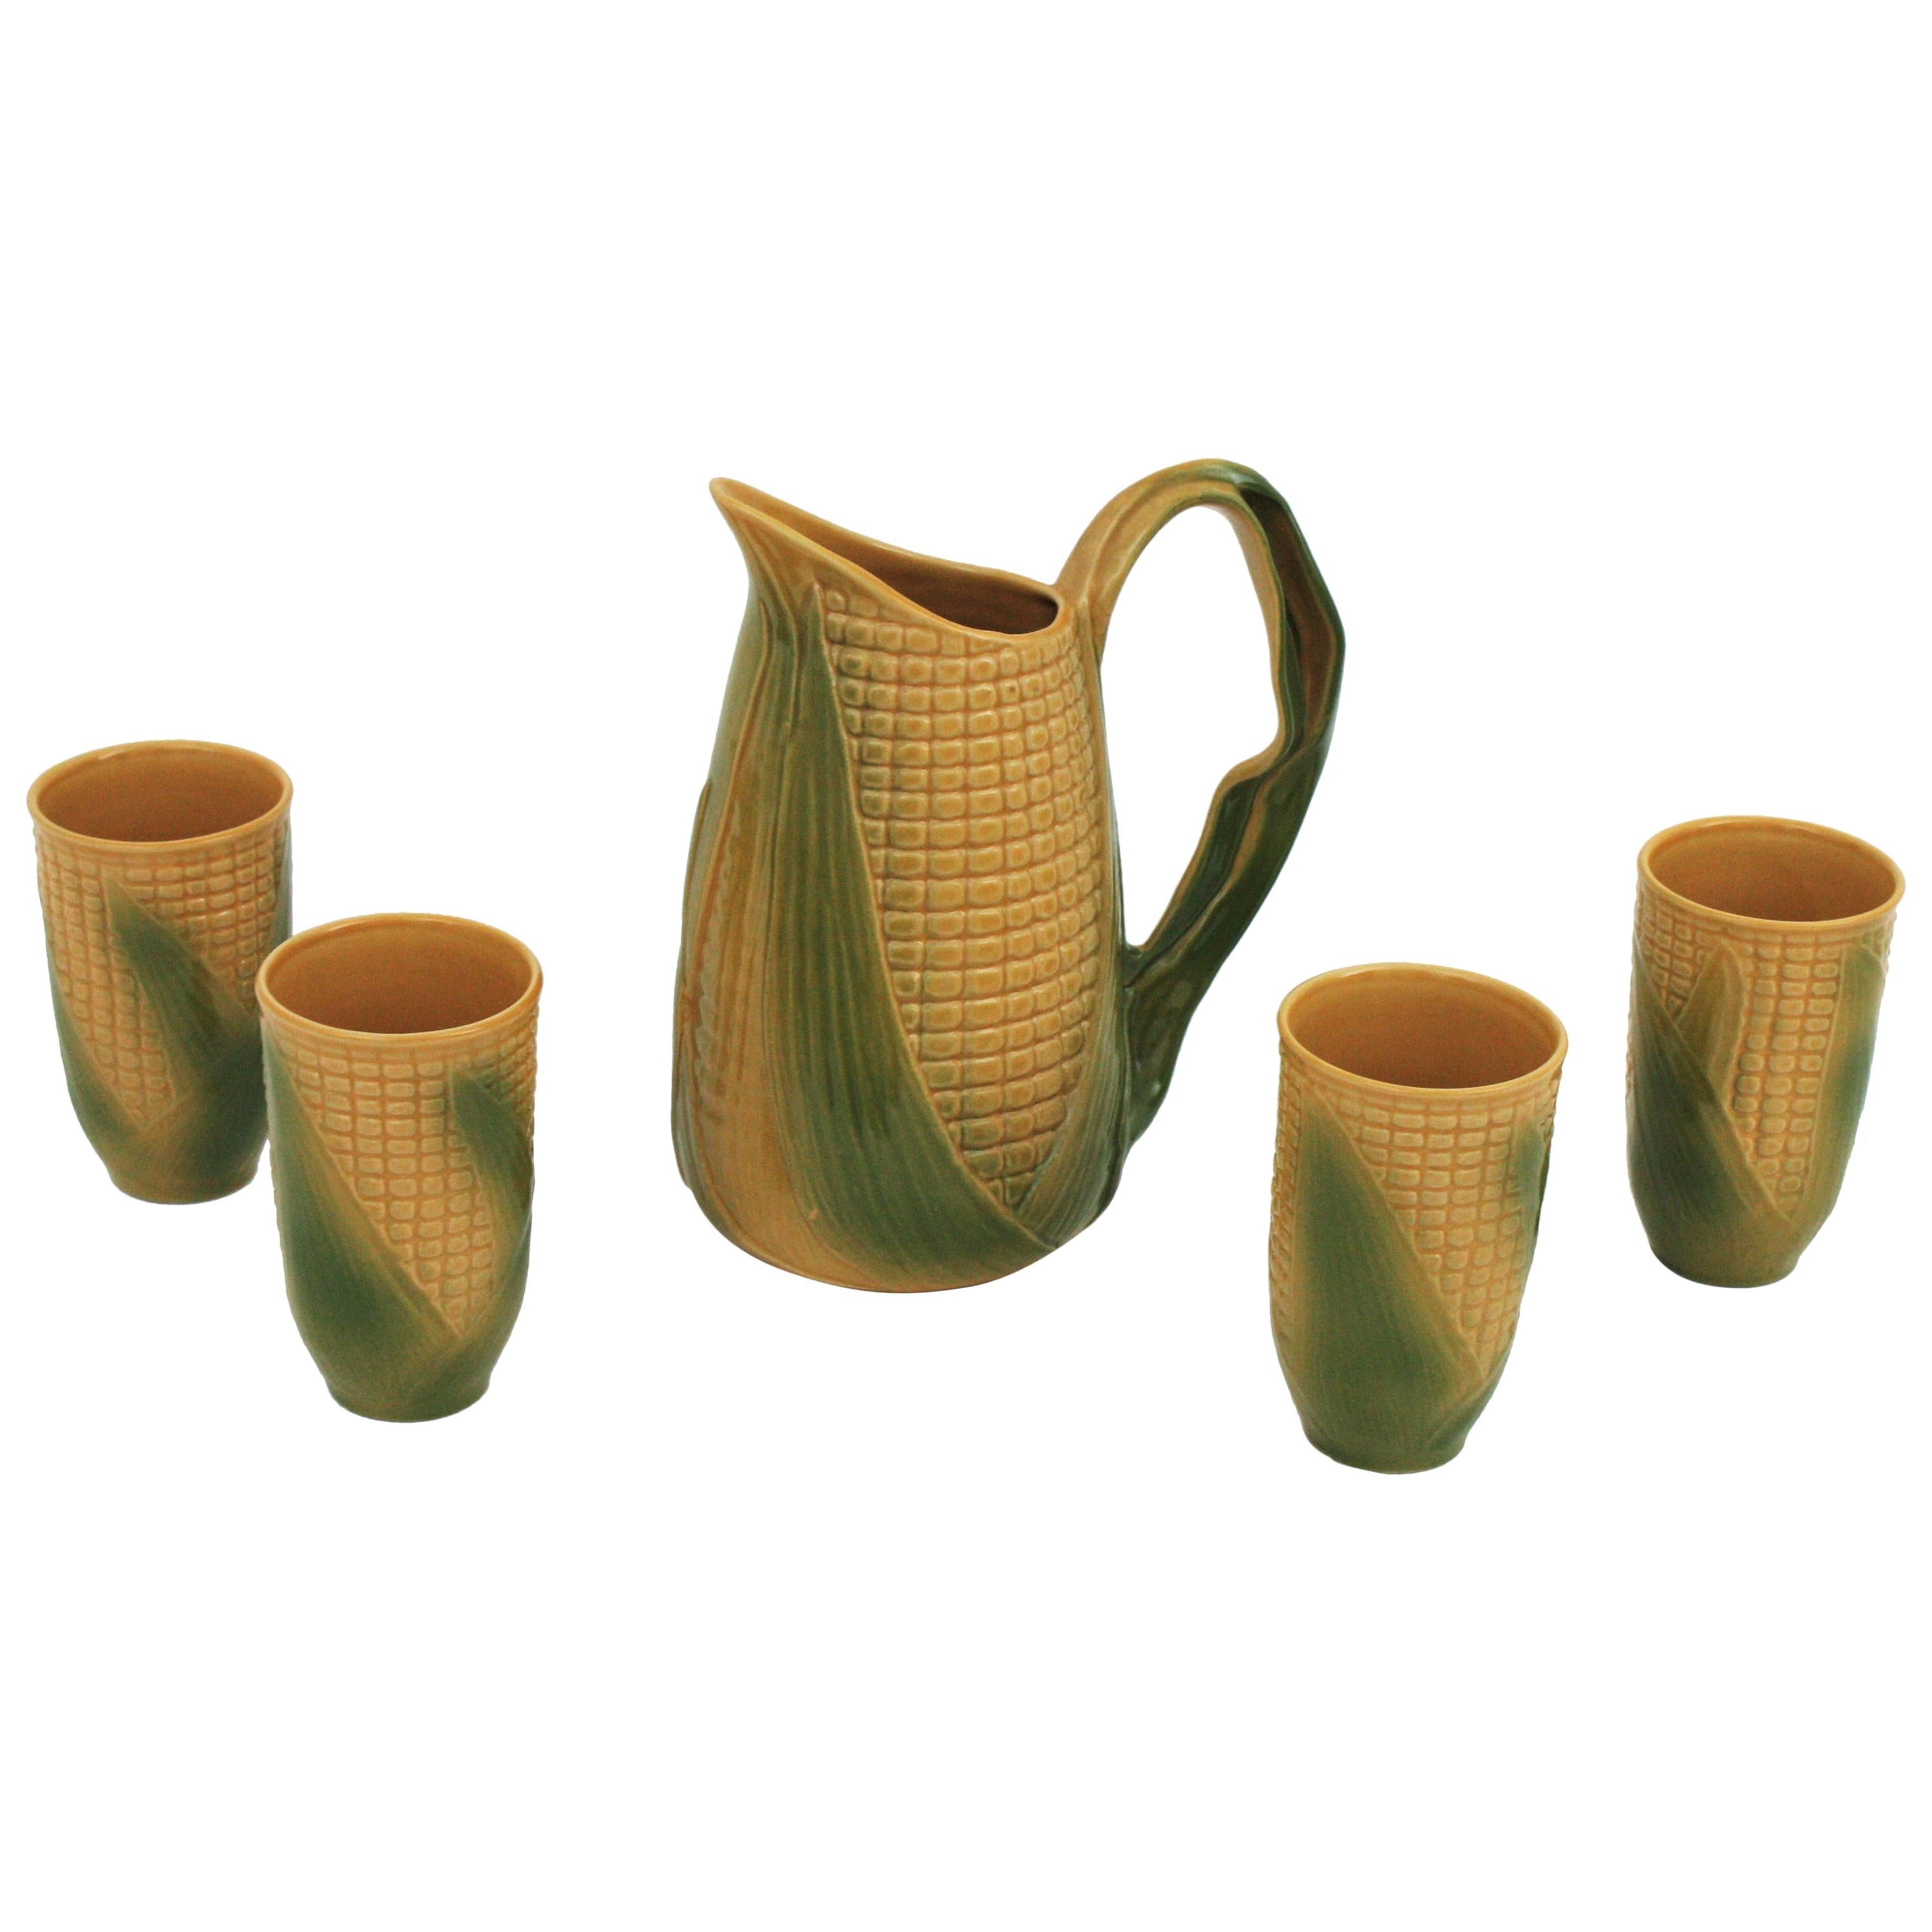 Set of Glazed Ceramic Corn on the Cob Glasses and Pitcher, France, 1960s For Sale